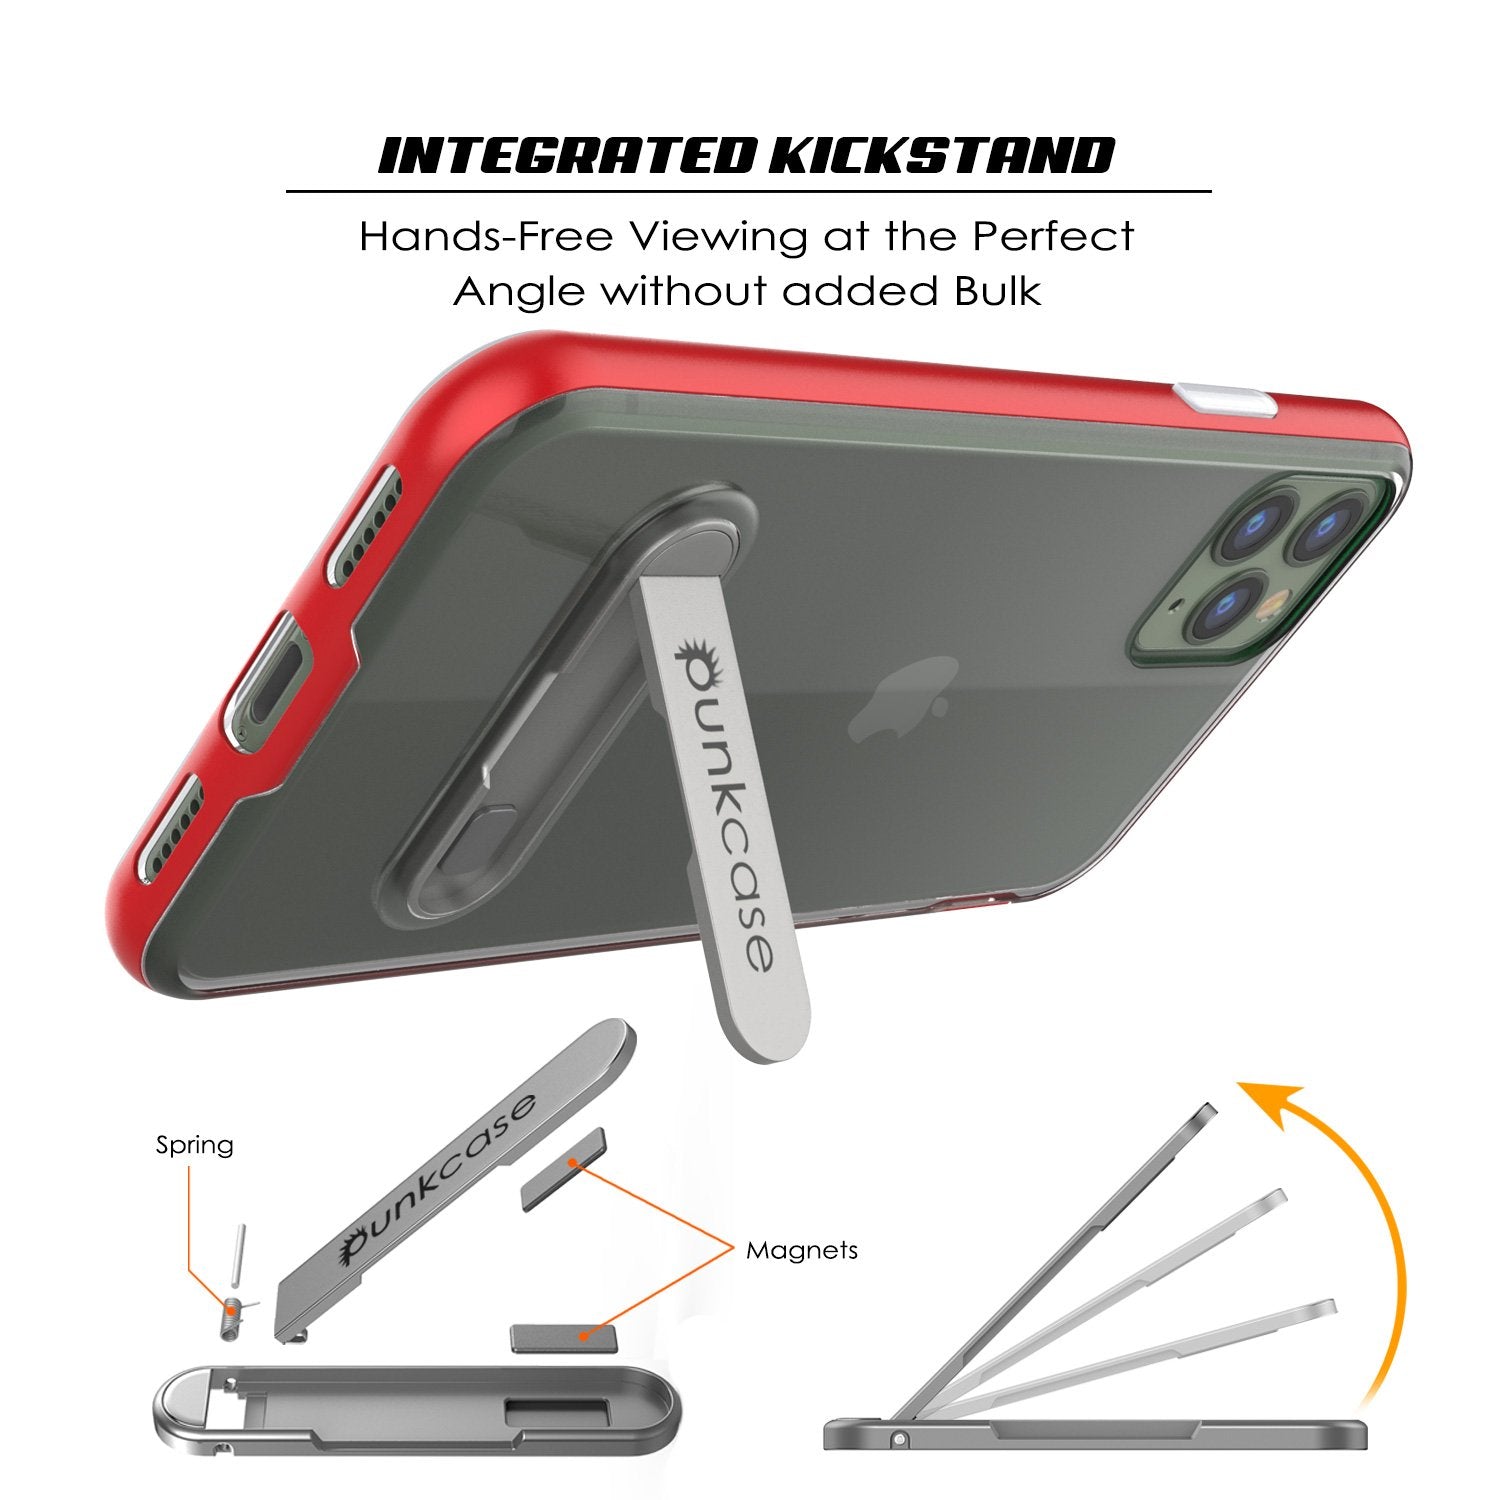 iPhone 11 Pro Max Case, PUNKcase [LUCID 3.0 Series] [Slim Fit] Armor Cover w/ Integrated Screen Protector [Red]